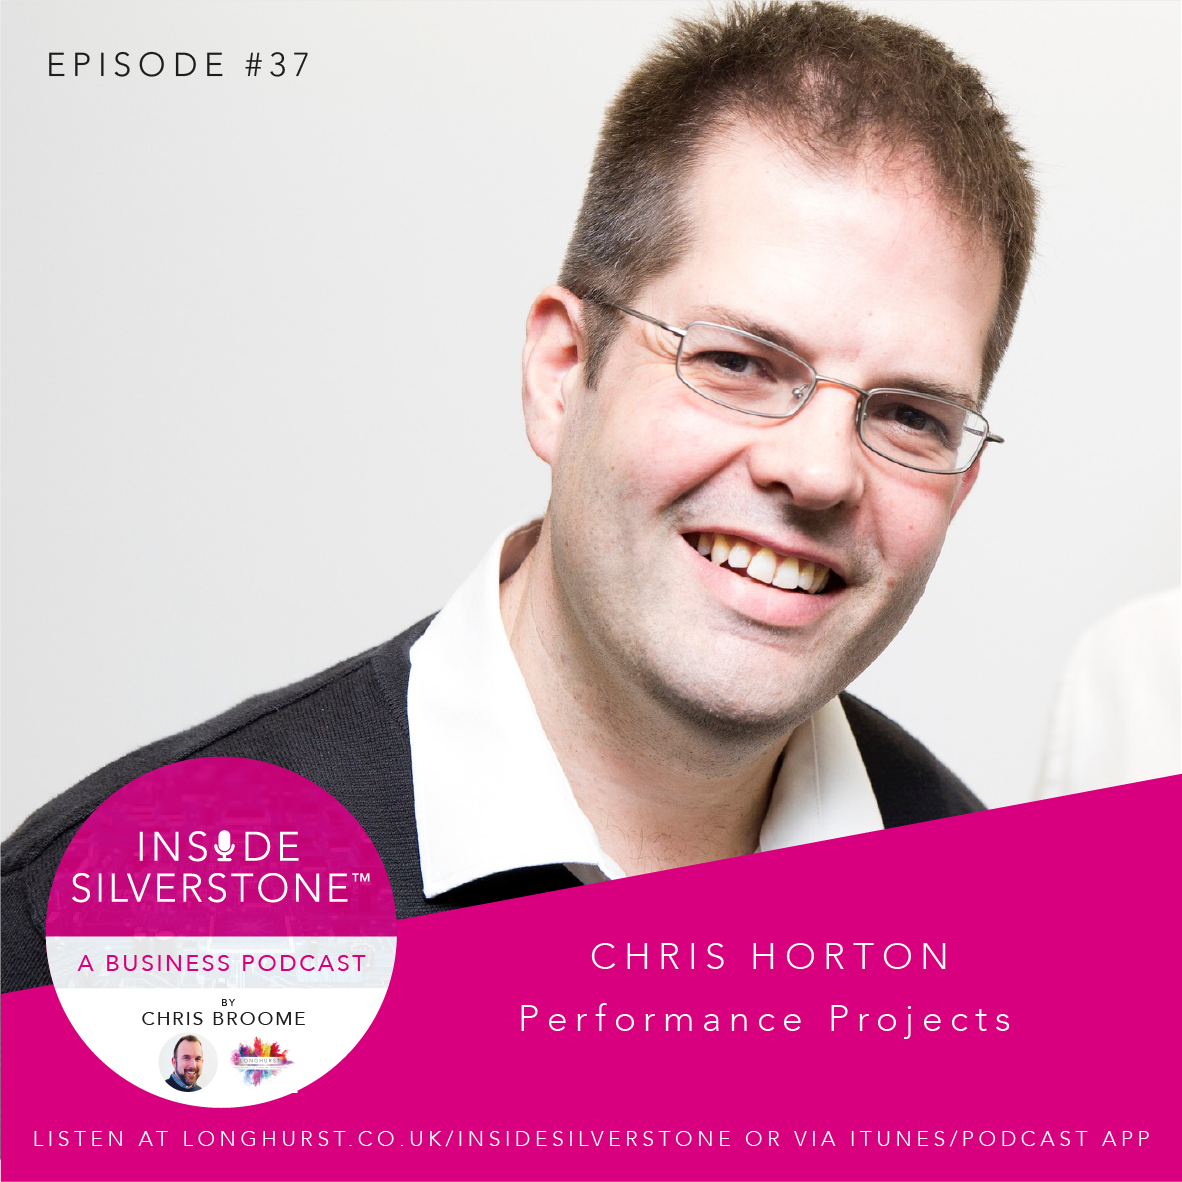 Chris Horton, MD of Performance Projects